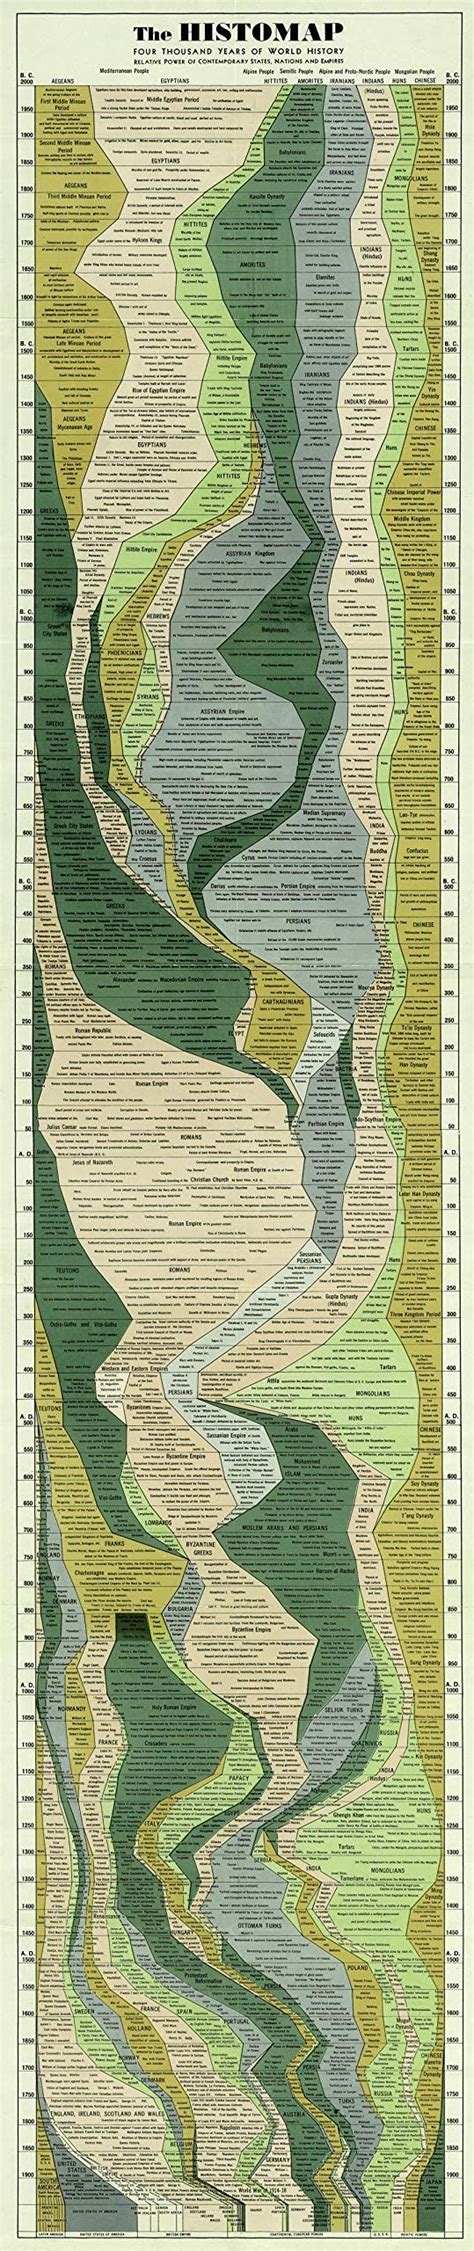 Histomap 4000 Years Of World History In One Captivating Print